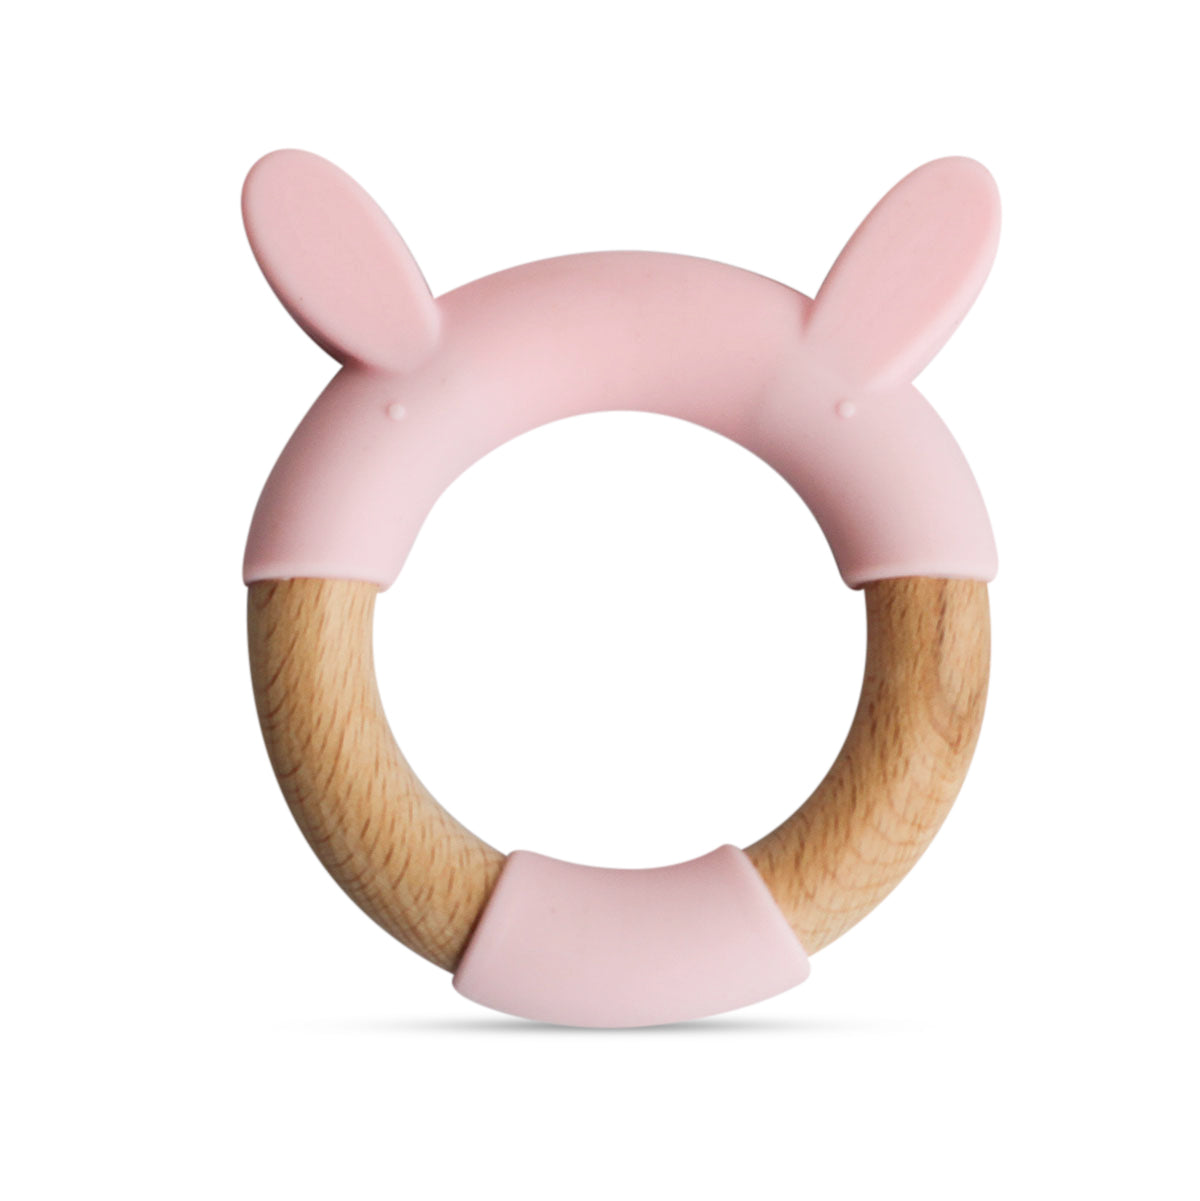 Wood + Silicone Ring Teether Toy - Pink